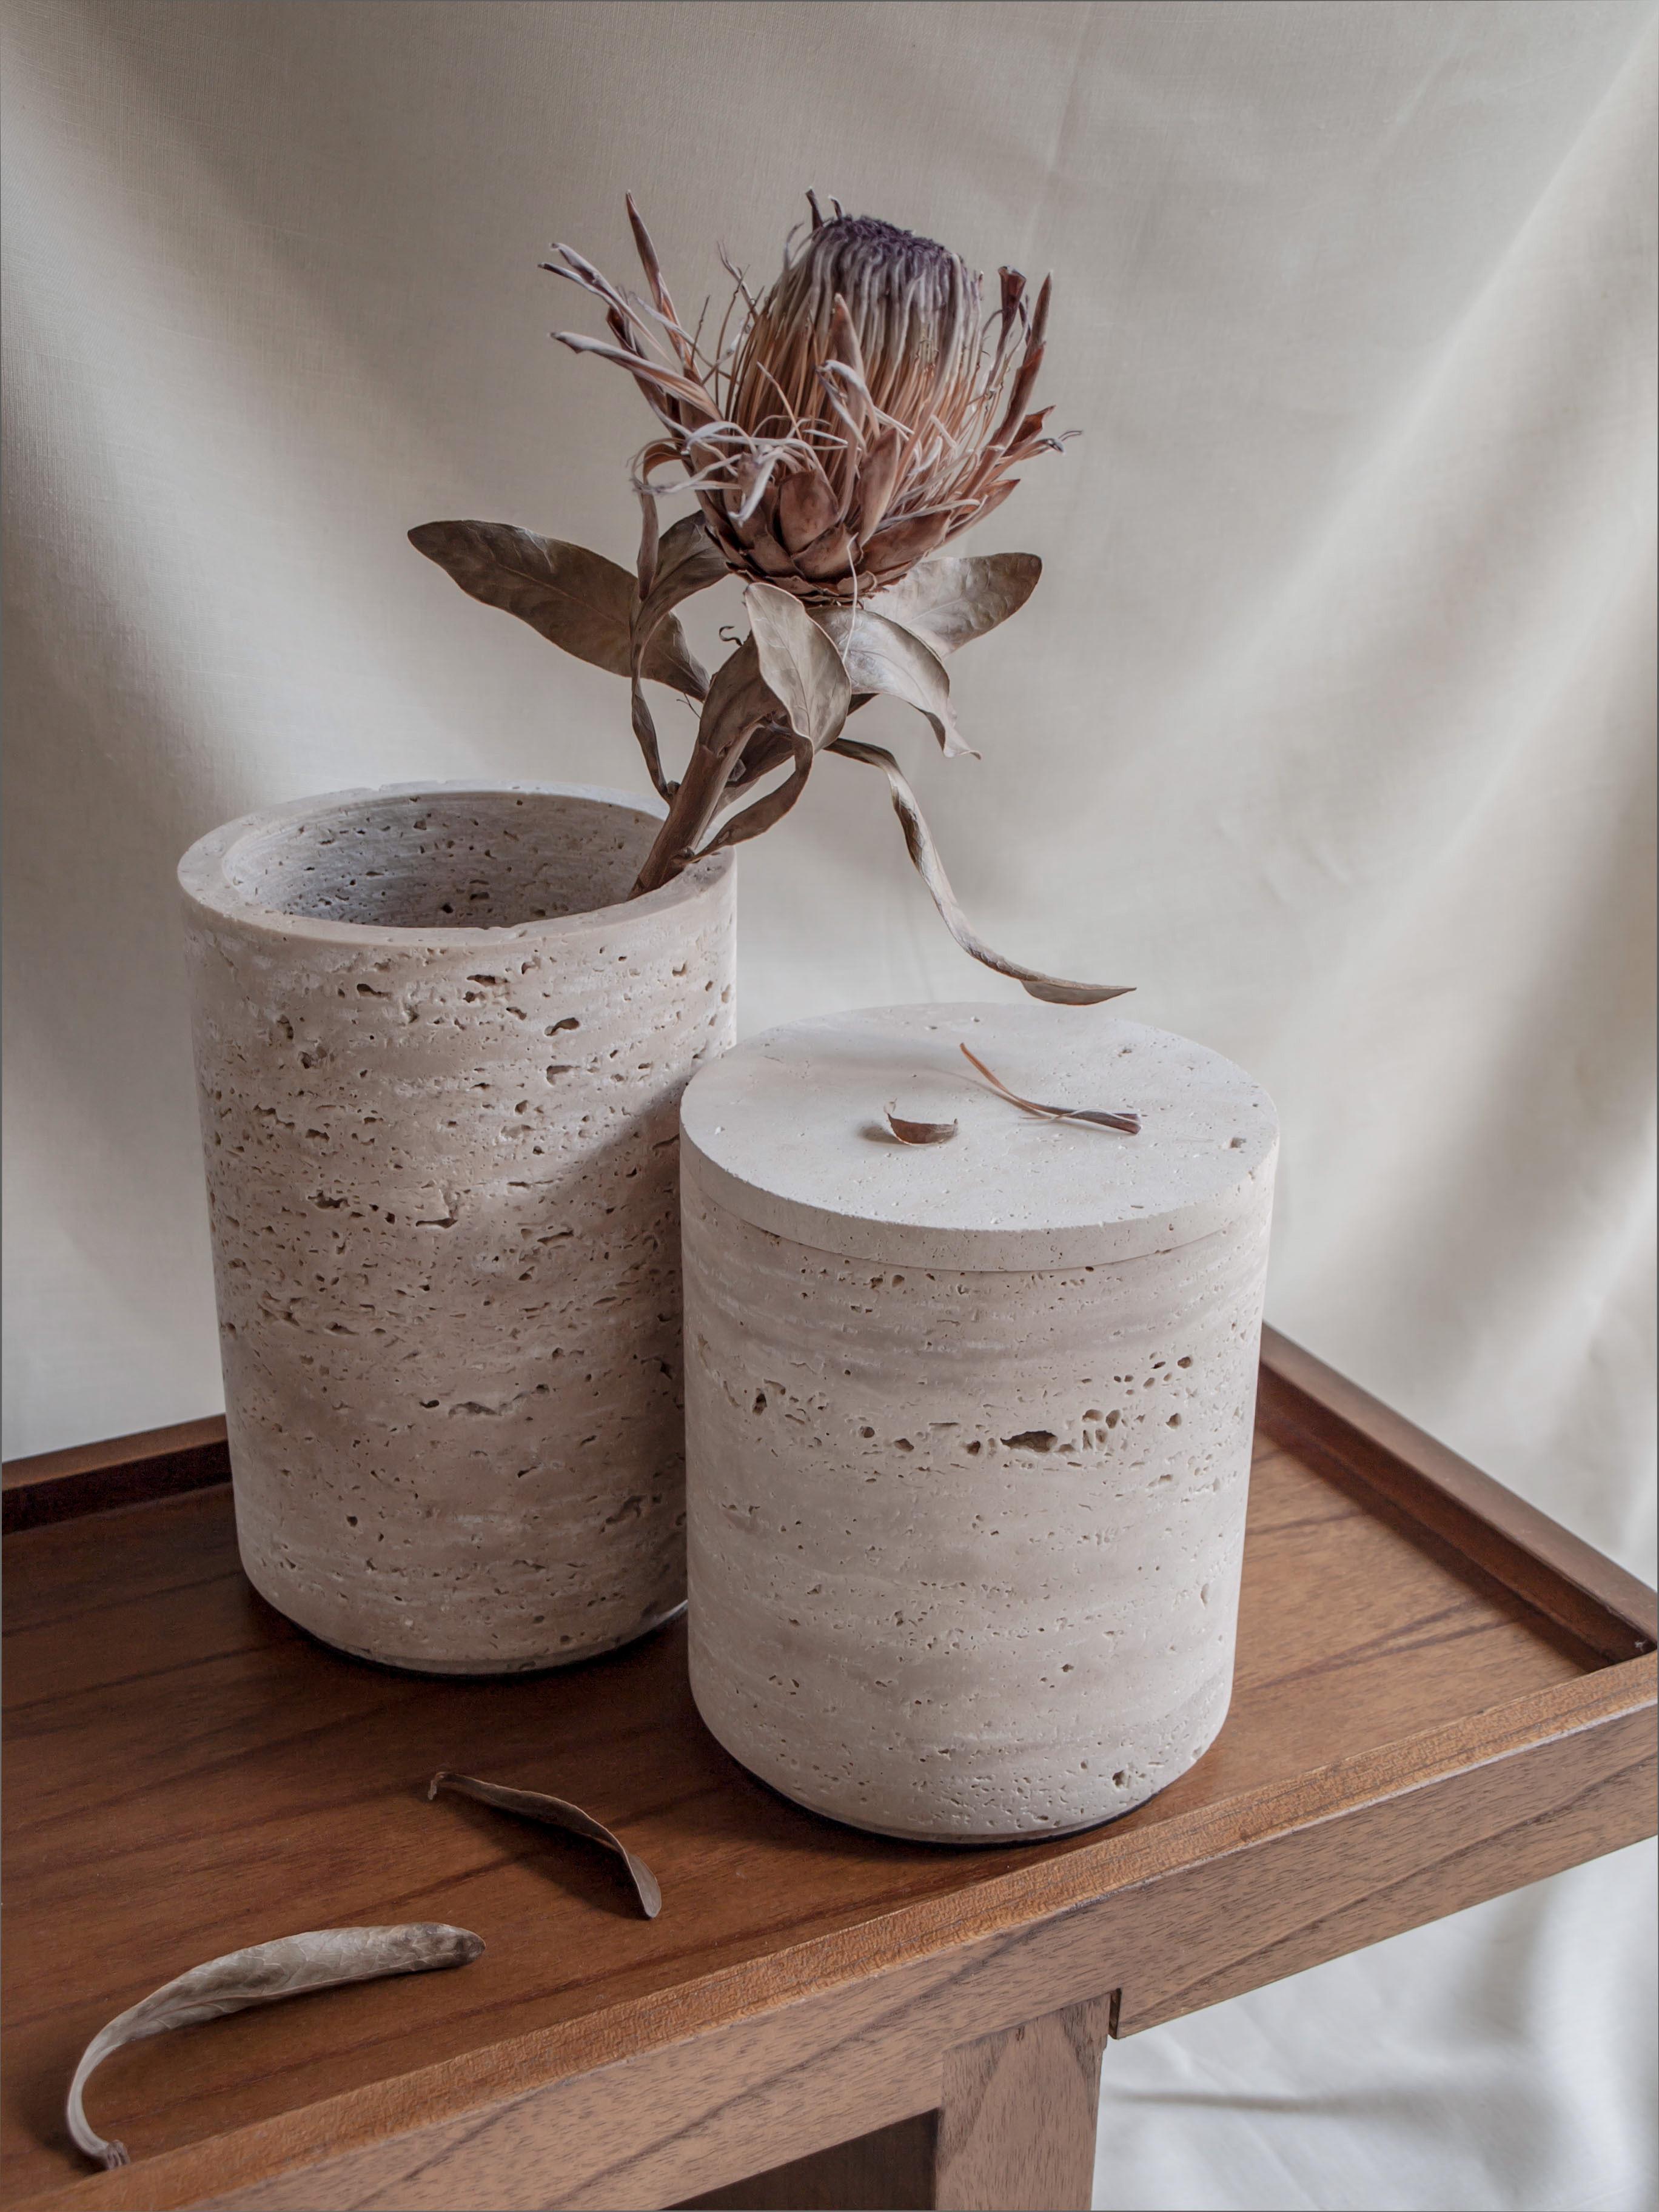 High Travertino Light Vase
Dimensions: Diameter 21cm x height 16cm
Materials: Travertino marble. Light Vein. 
Technique: Hand-crafted, natural finished. 

Designer's Biography: 

Bicci de’ Medici manufactures exclusive design pieces, formed